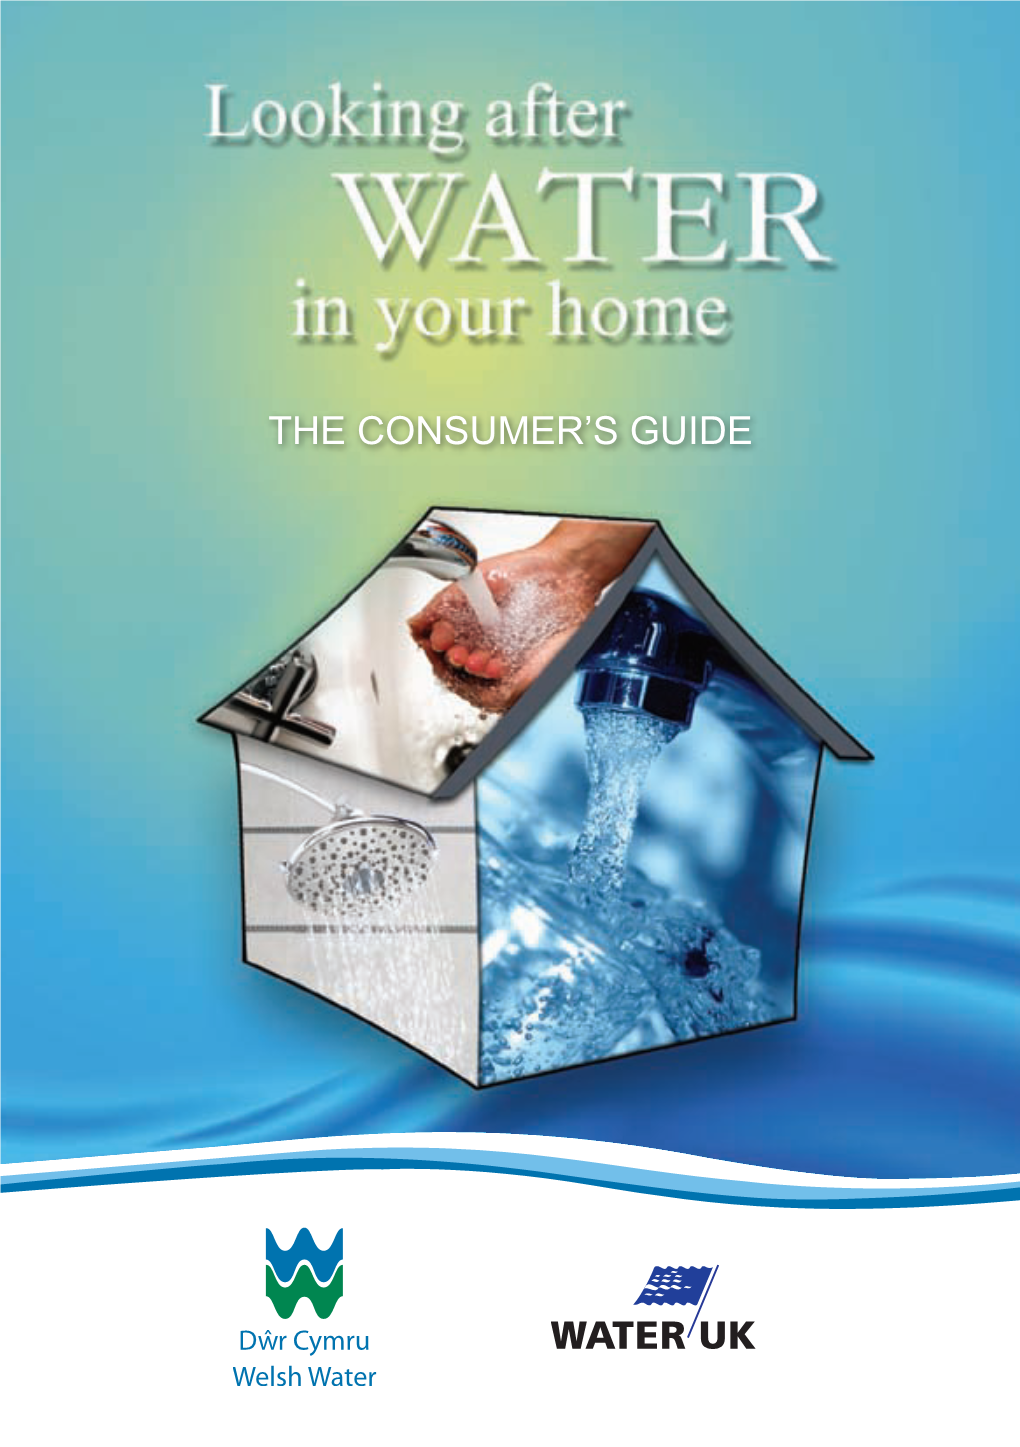 Looking Afetr Water in Your Home